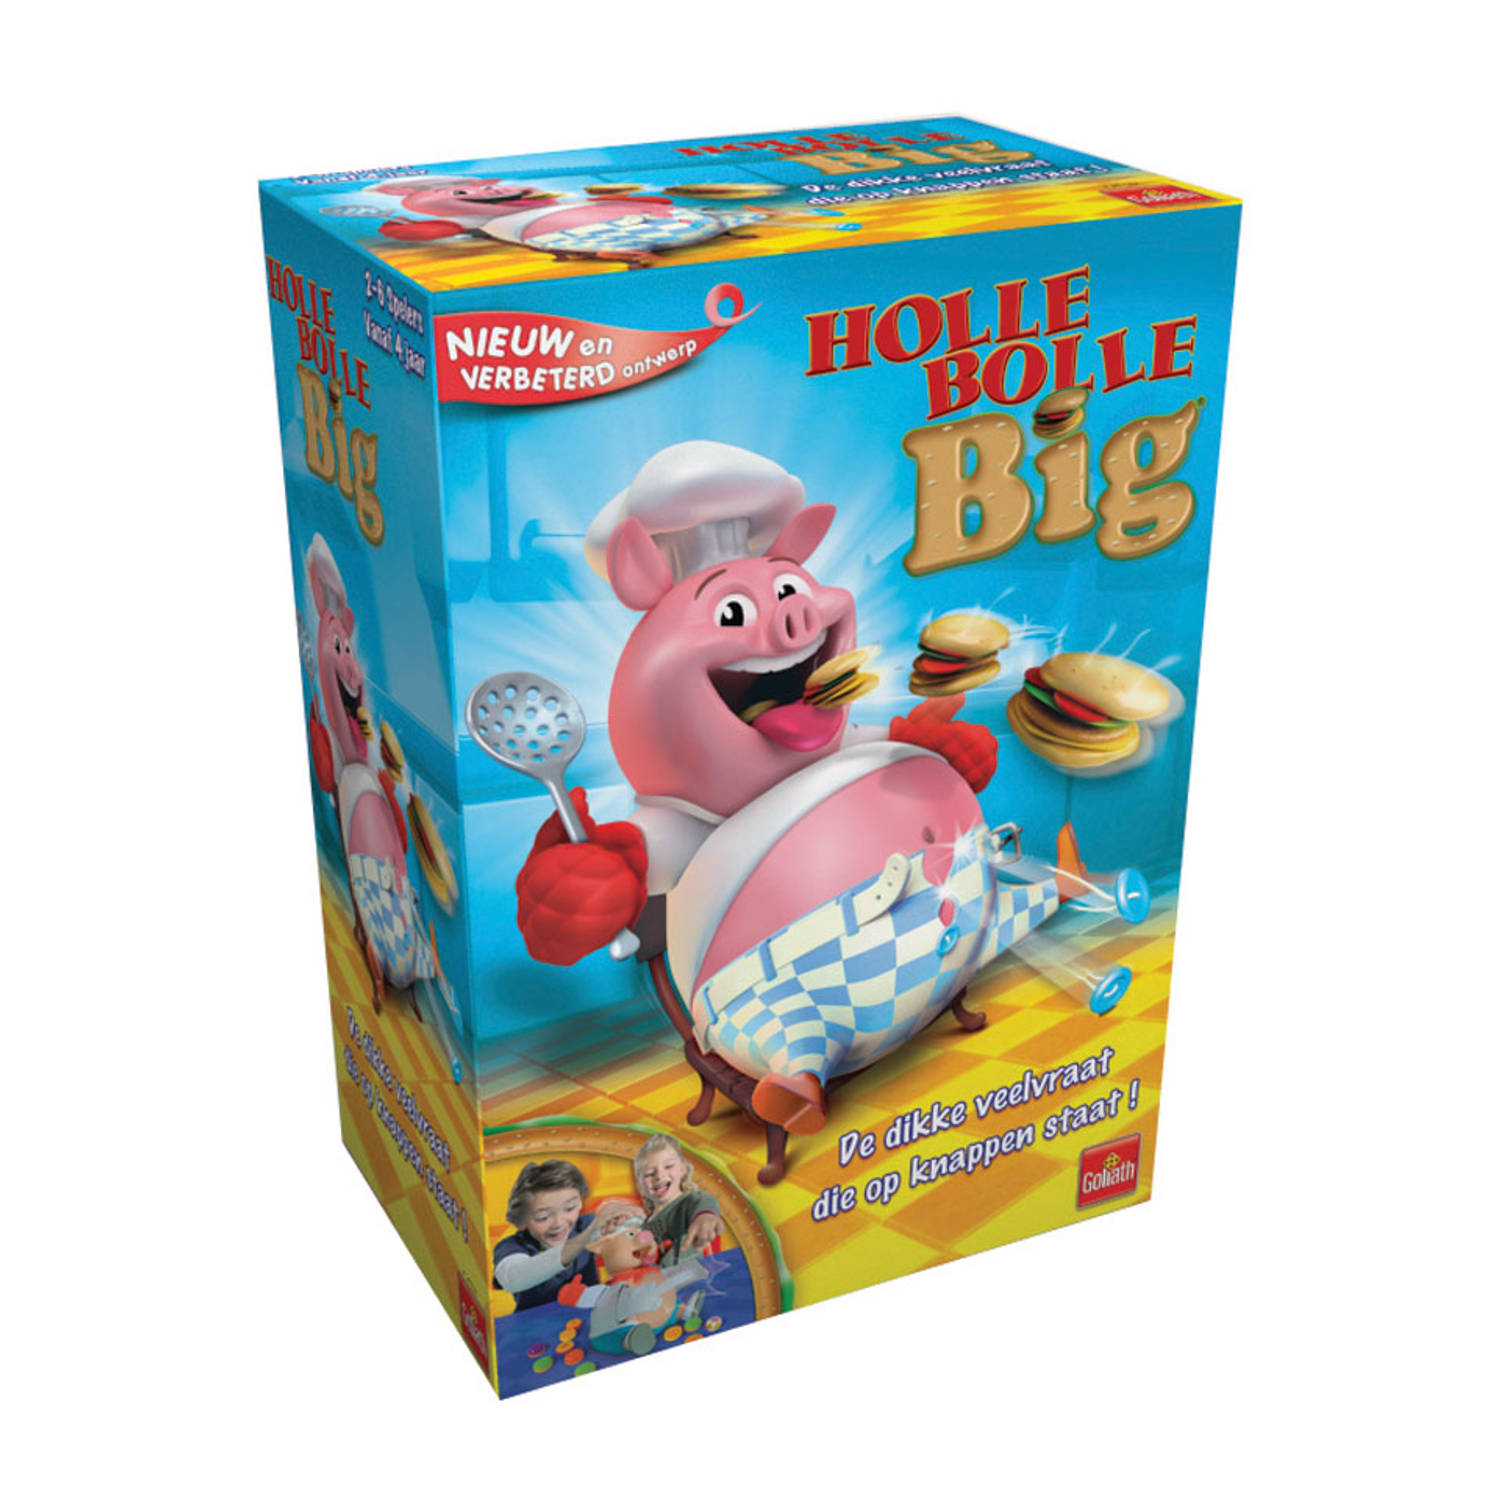 Holle Bolle big -